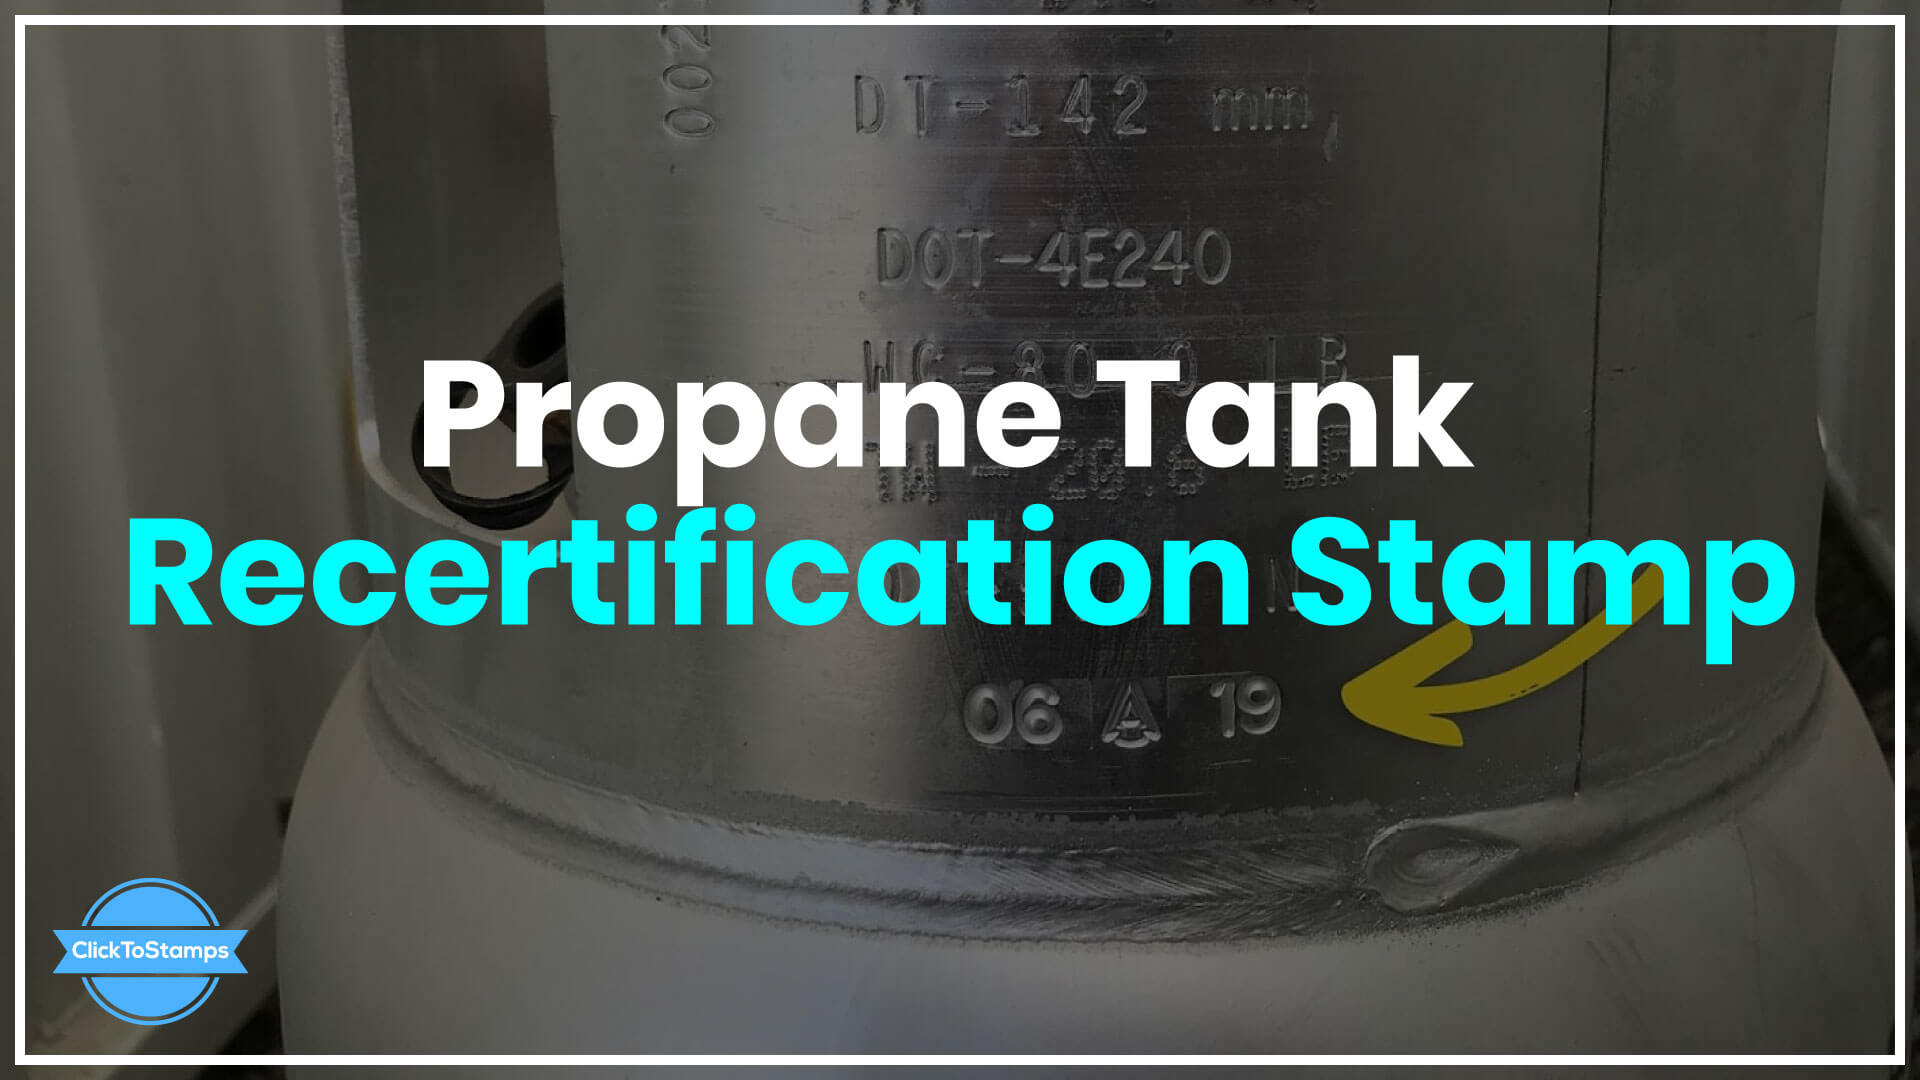 What is Propane Tank Recertification Stamp